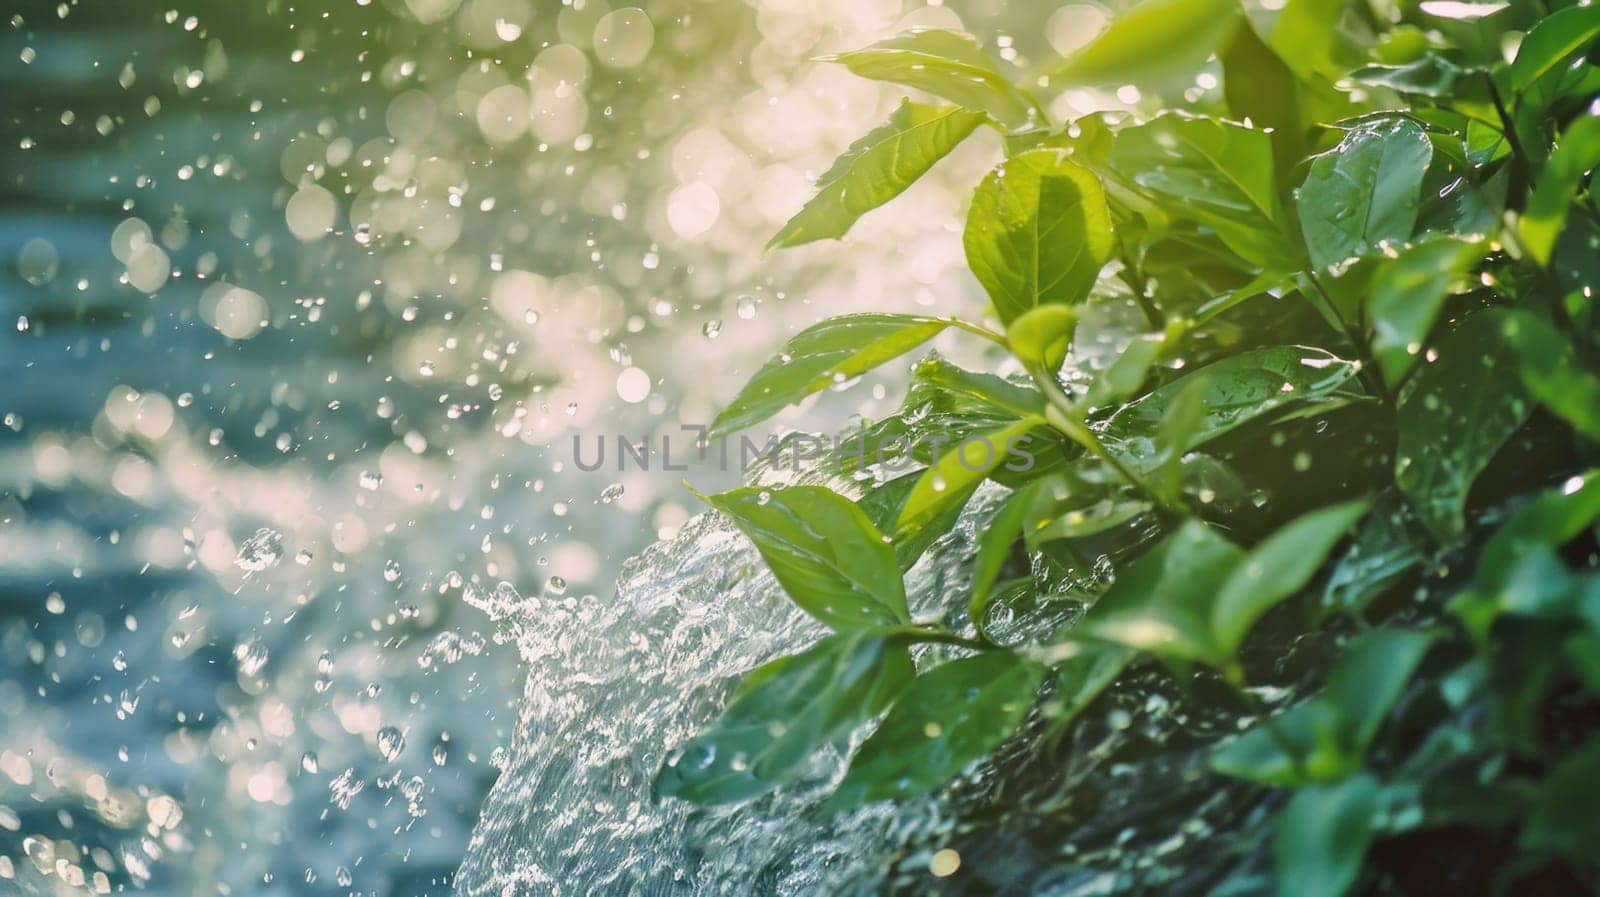 Sunlit droplets on fresh green foliage. Created using AI generated technology and image editing software.